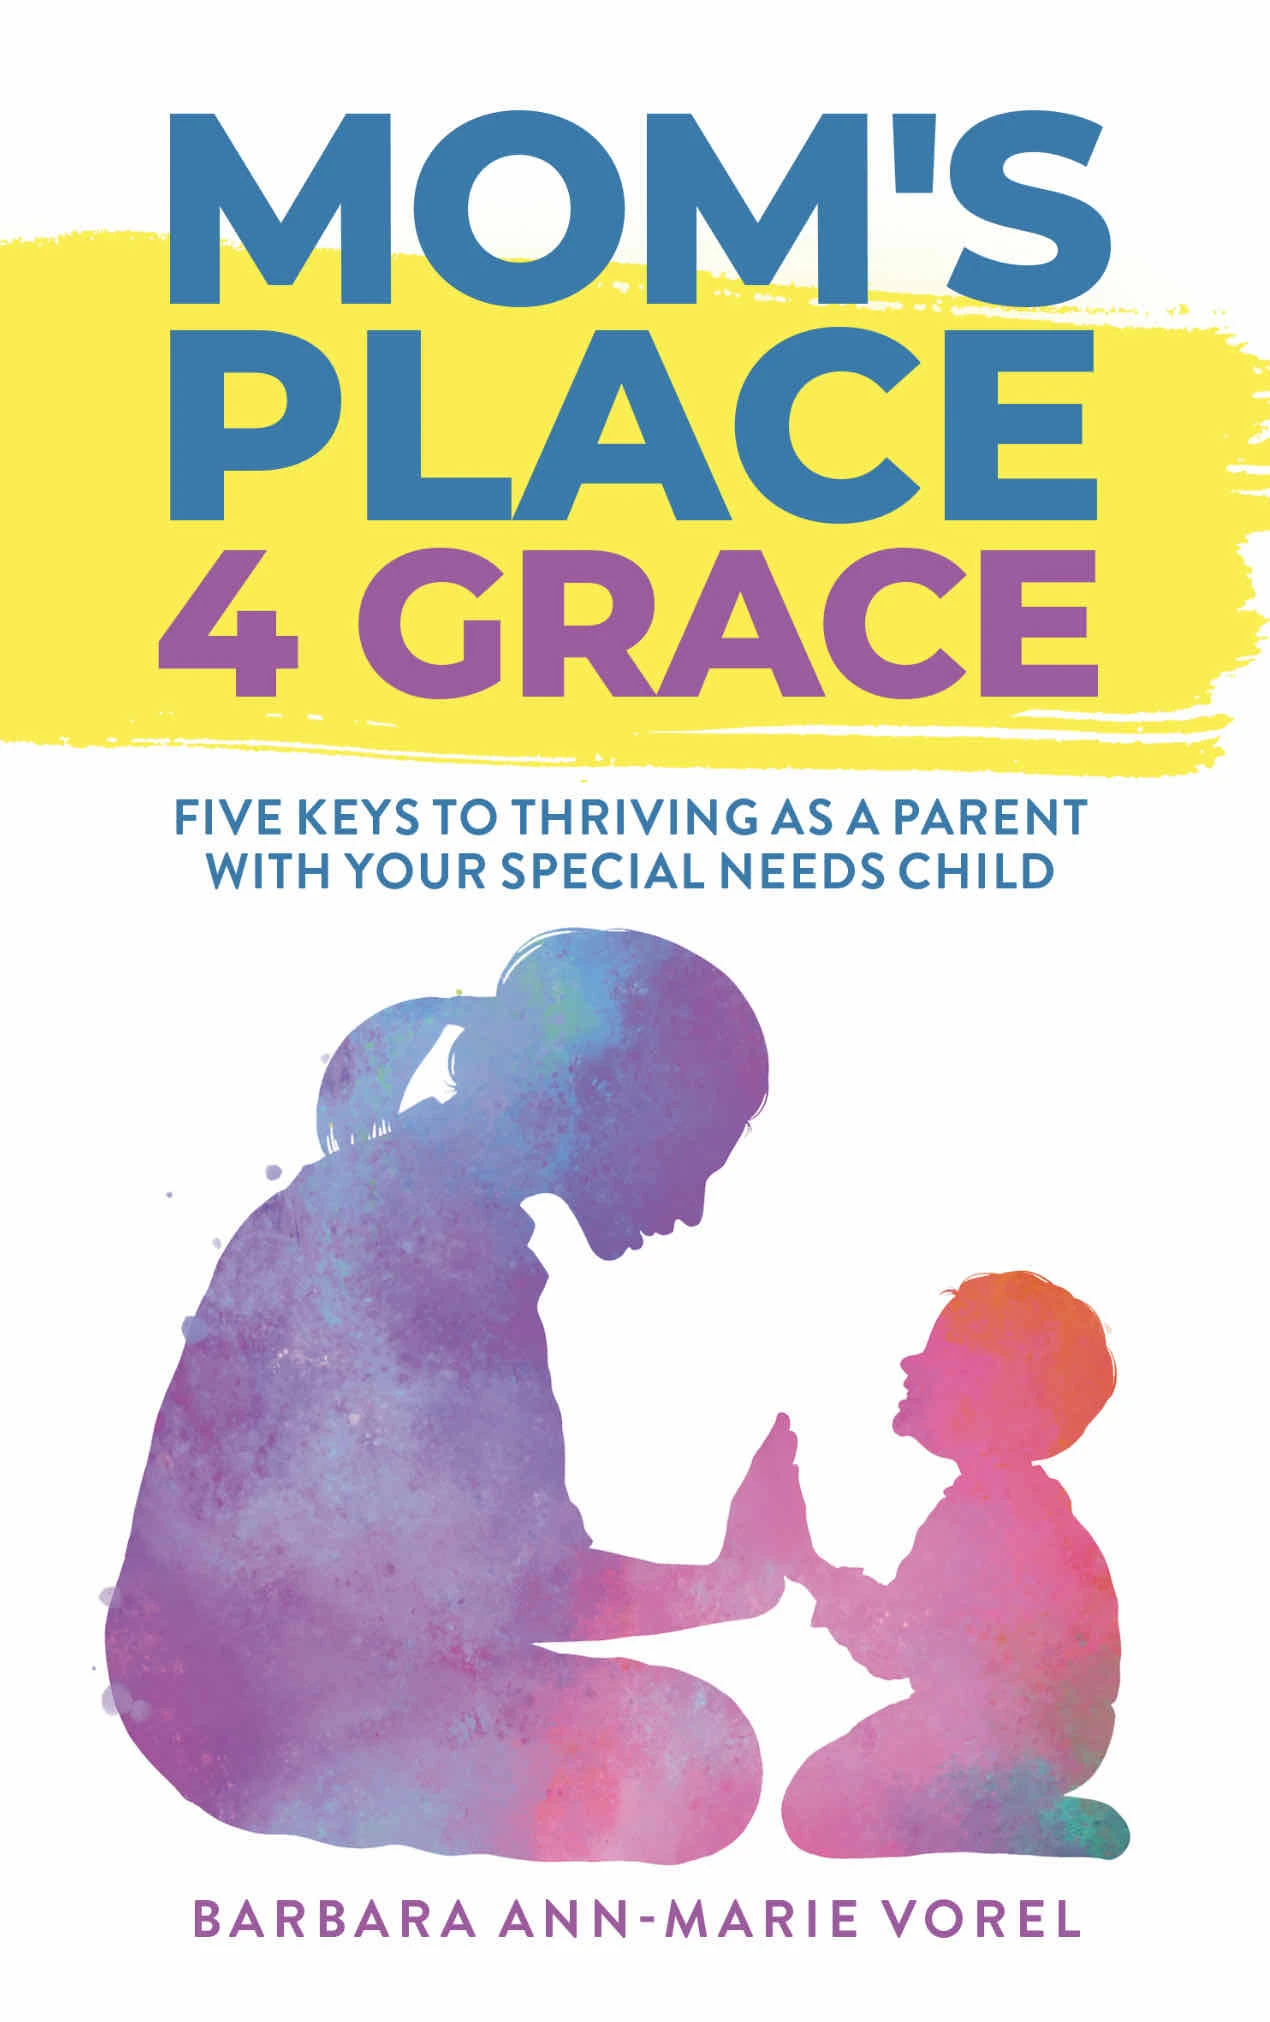 Mom’s Place 4 Grace: Five Keys to Thriving As a Parent With Your Special Needs Child